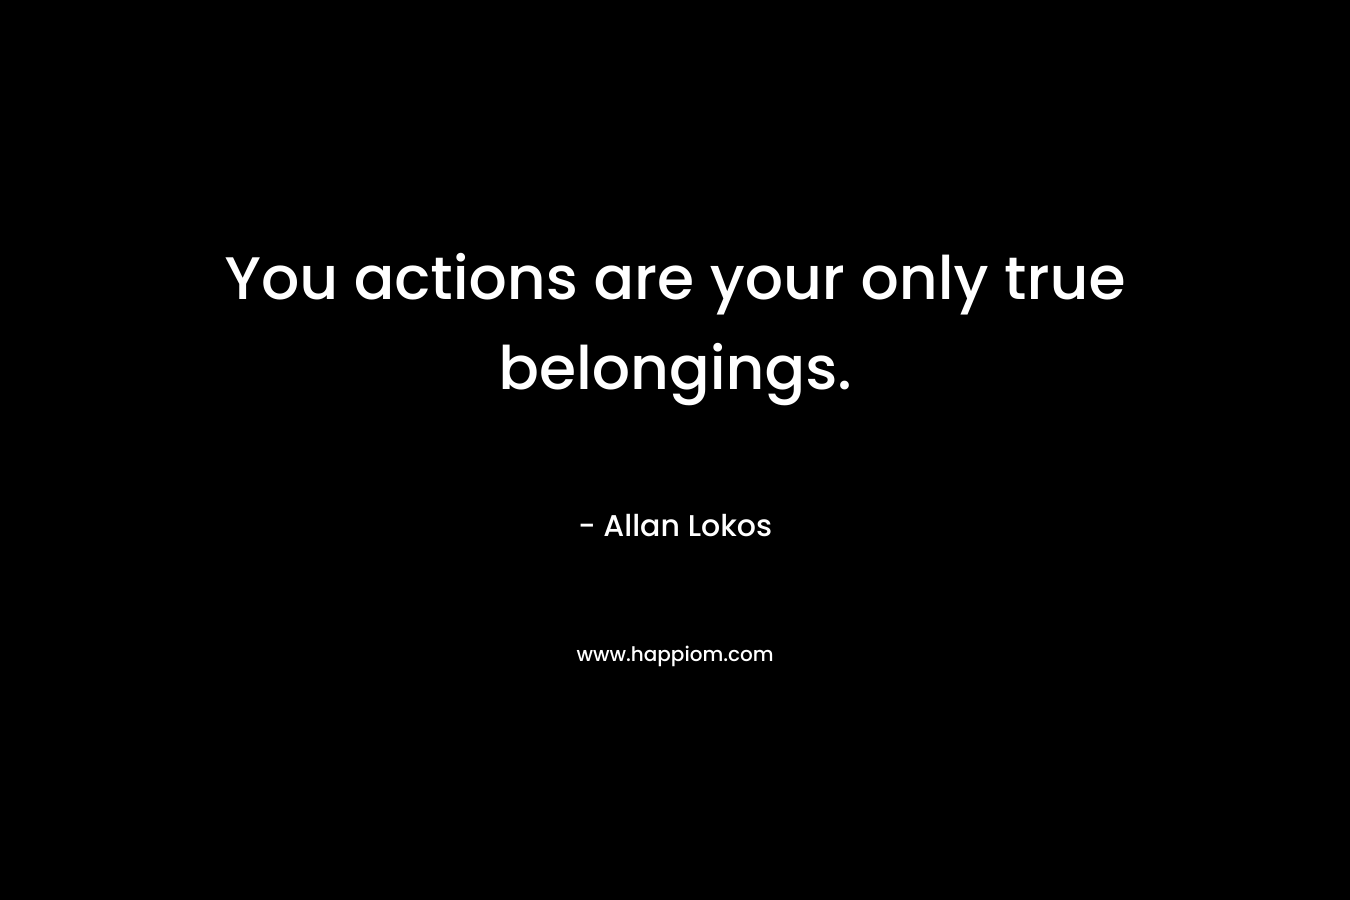 You actions are your only true belongings. – Allan Lokos